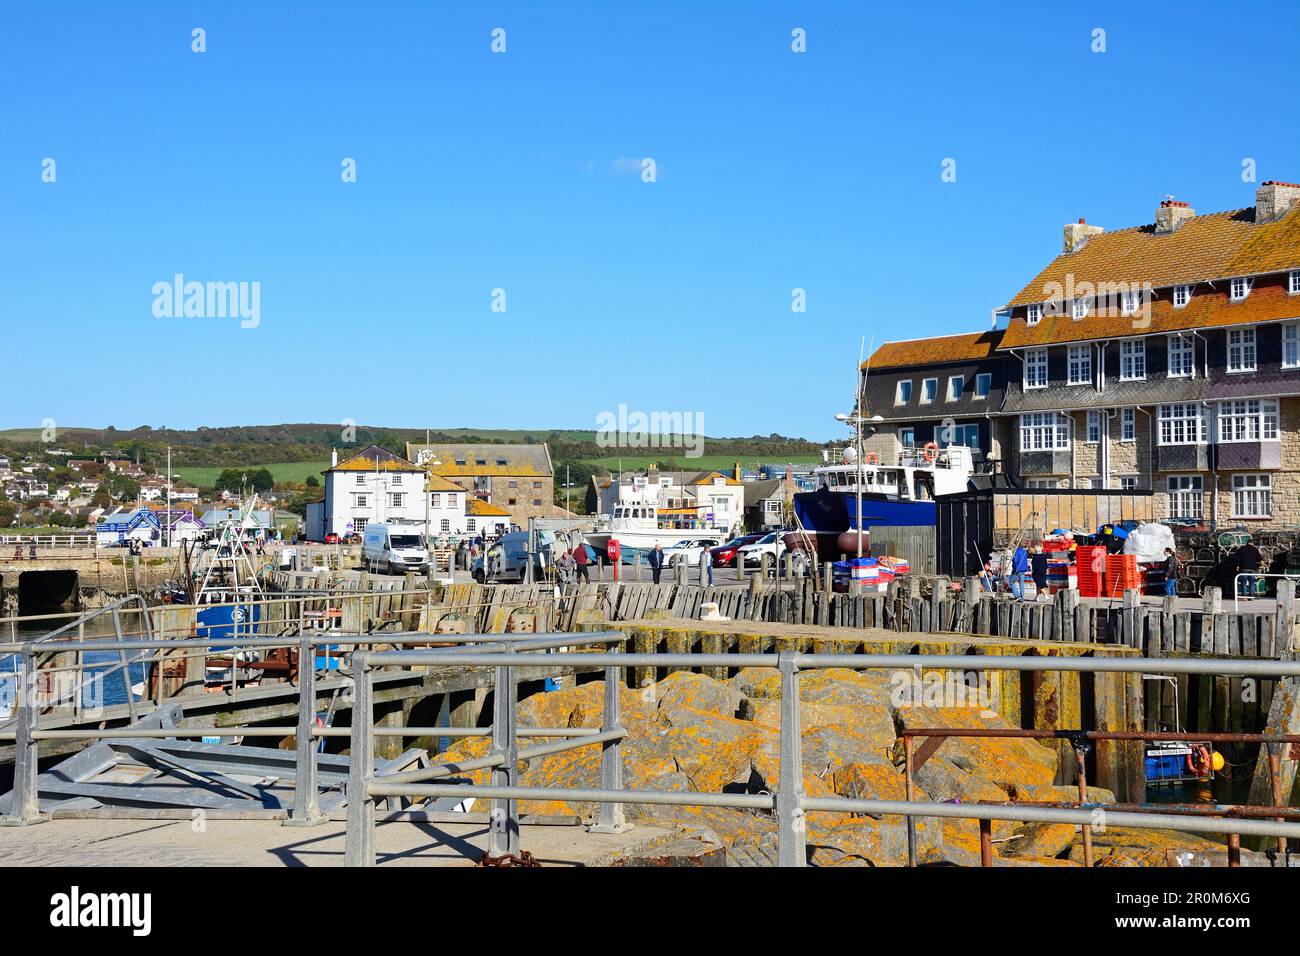 View of the harbour area with town buildings to the rear, West Bay, Dorset, UK, Europe. Stock Photo